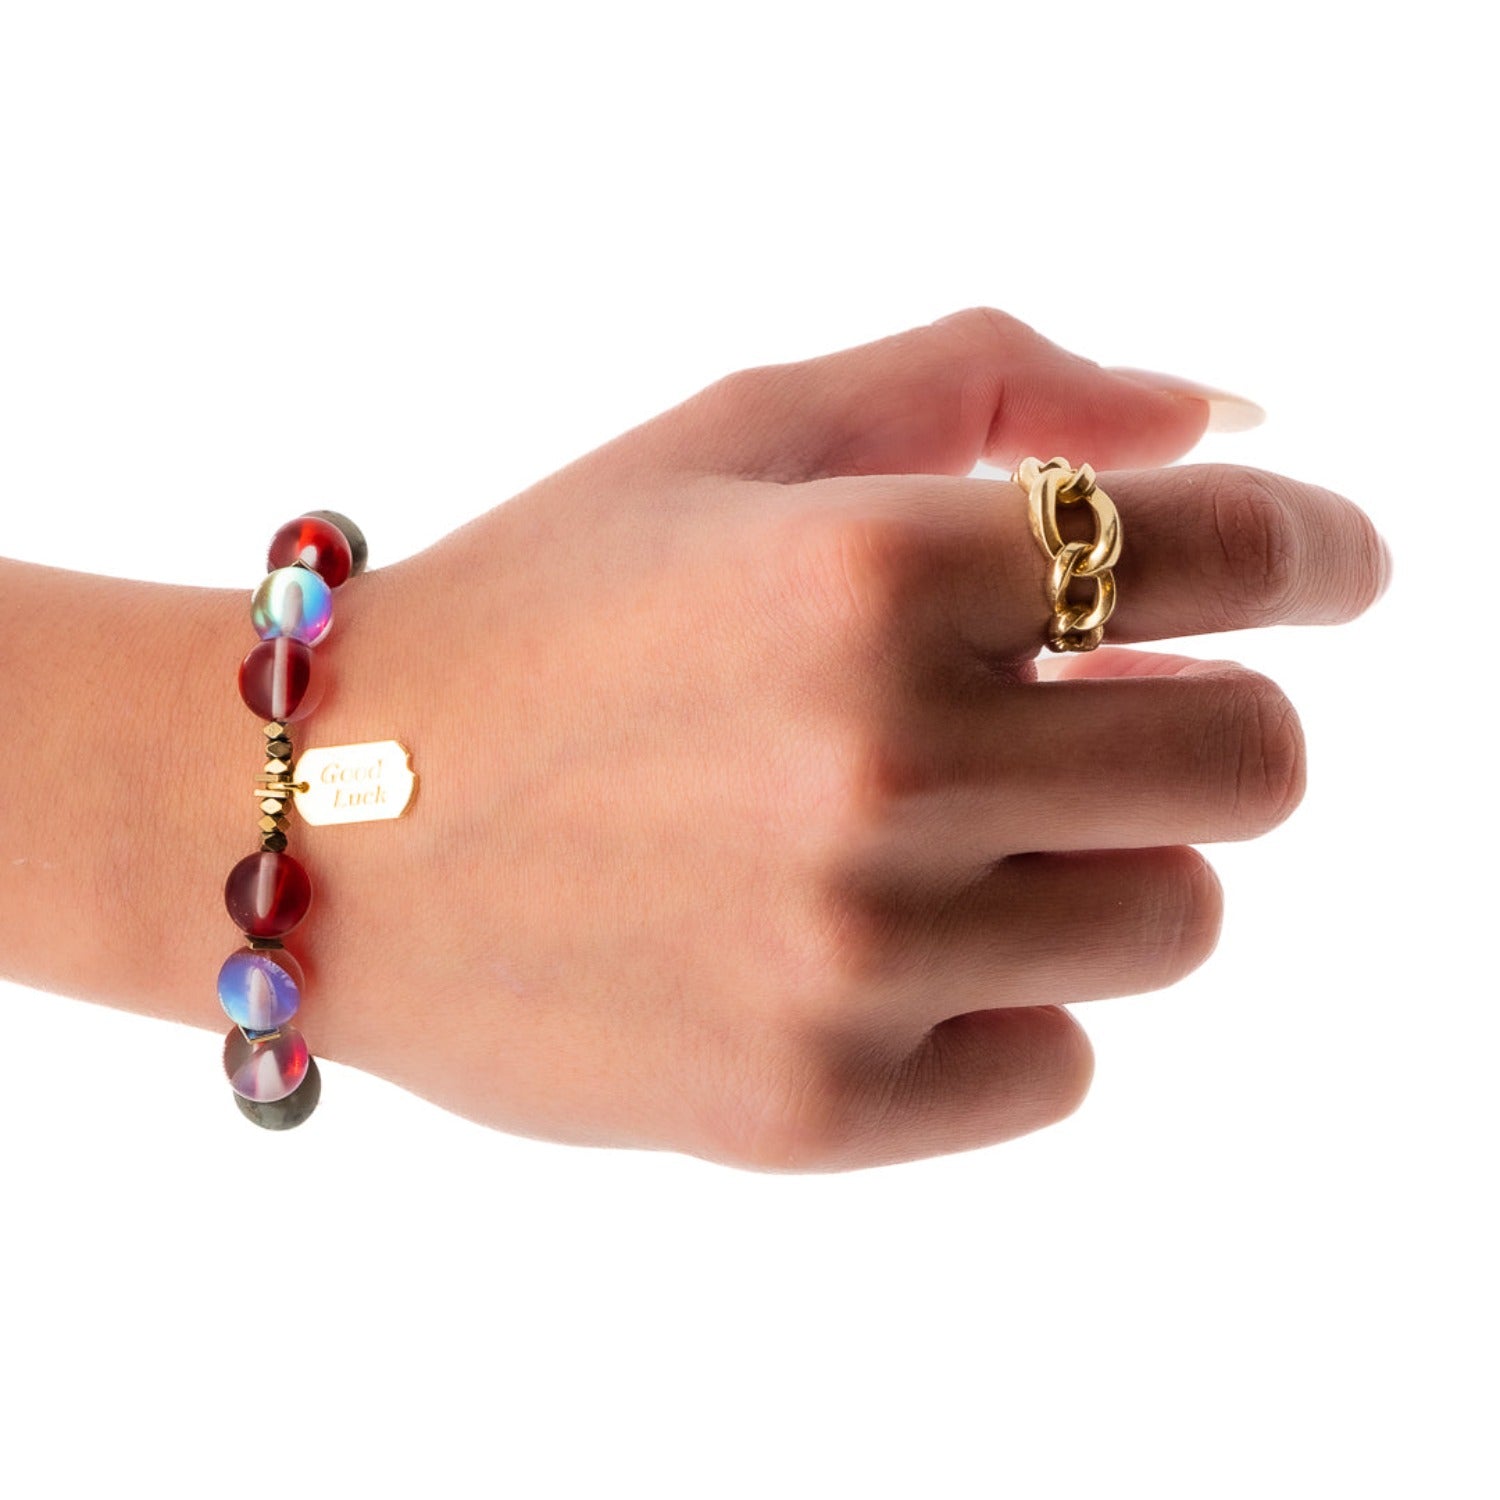 See how the Red &amp; Gold Good Luck Bracelet enhances the model&#39;s hand, adding a touch of sophistication and charm.